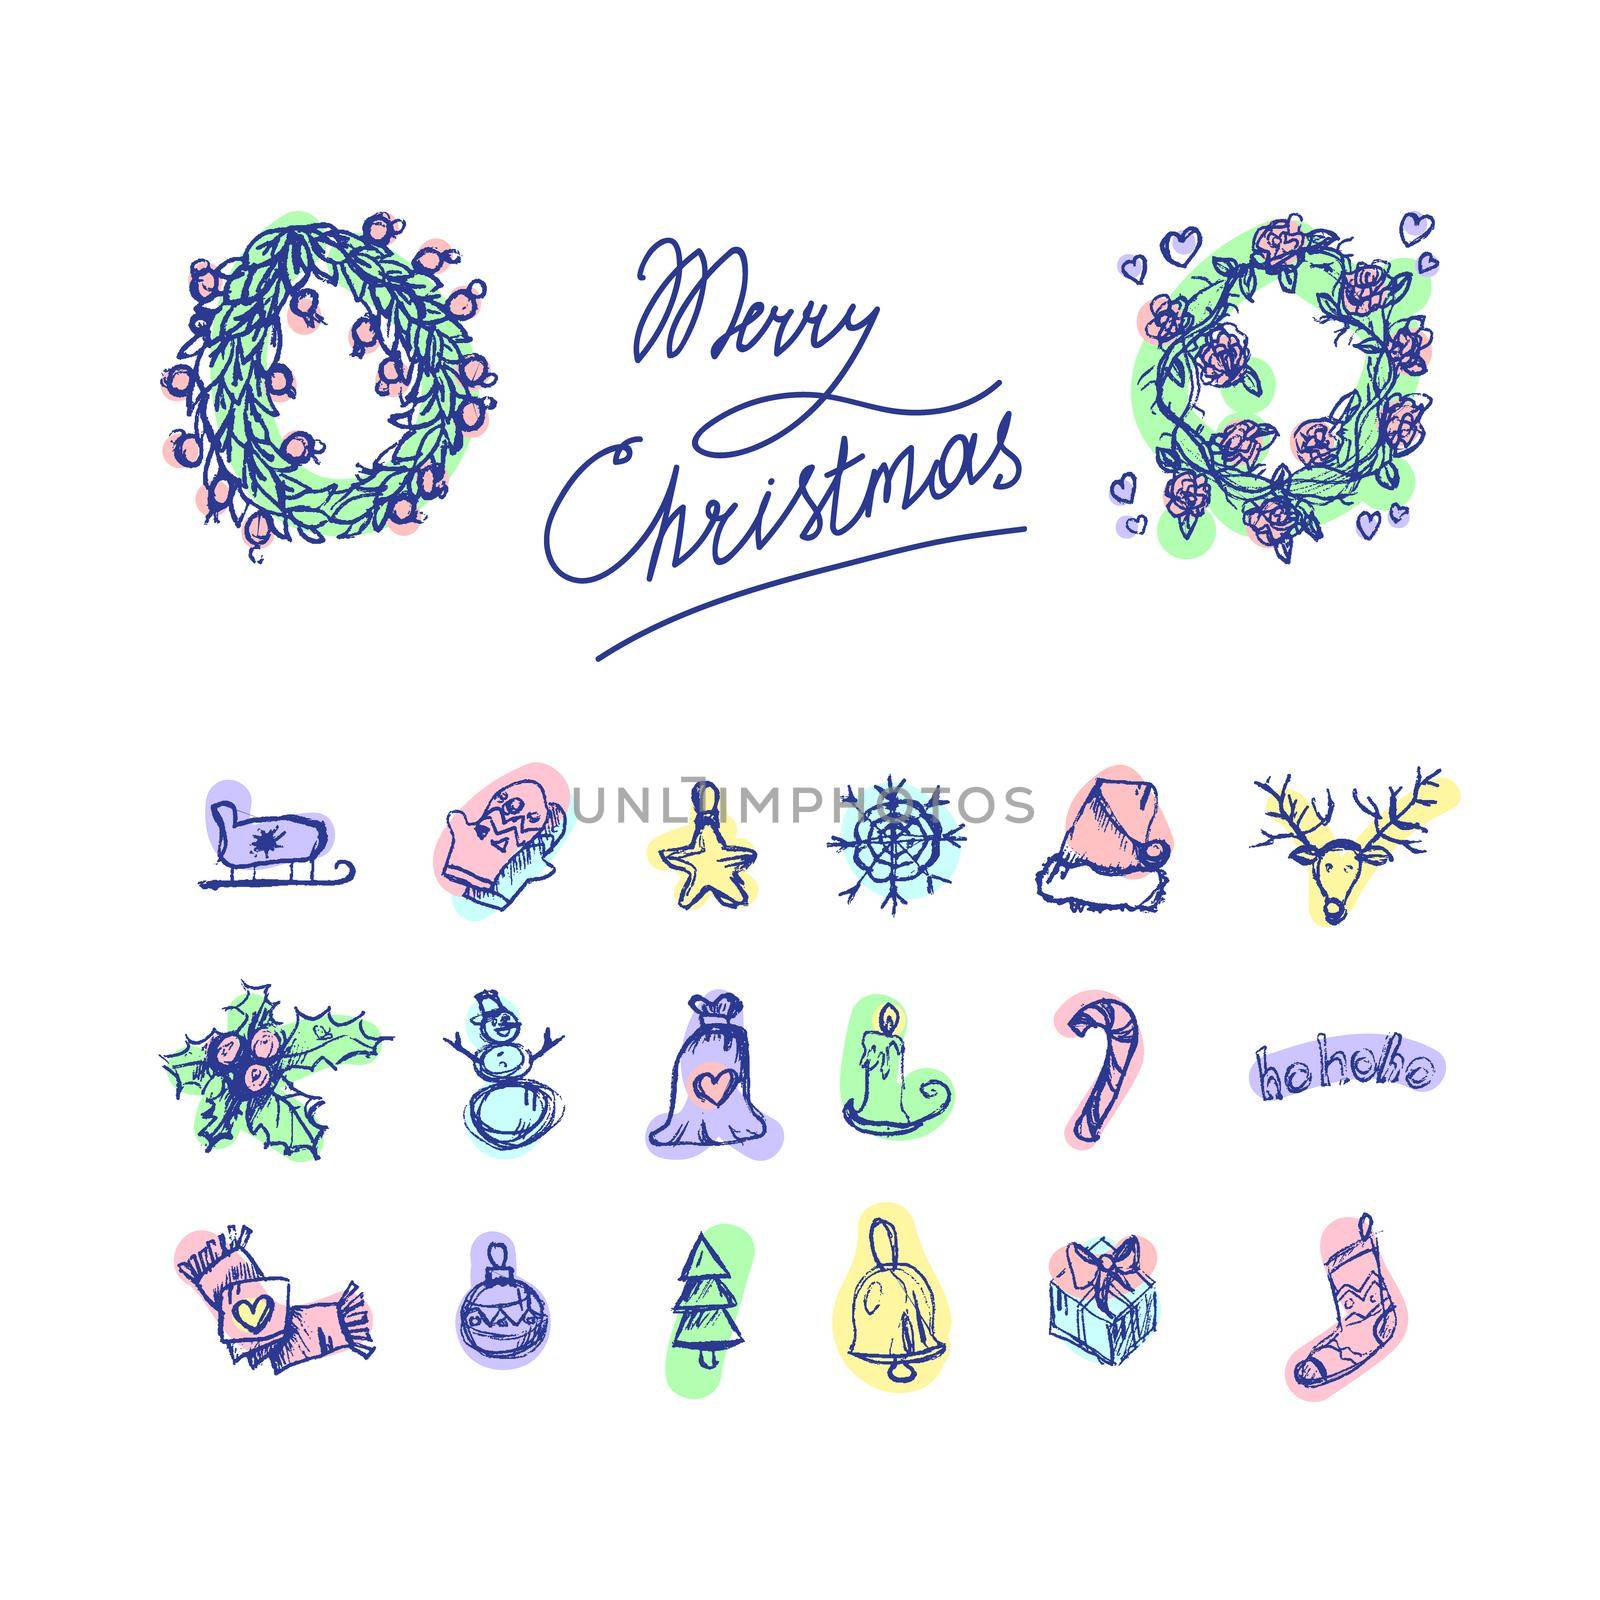 Merry Christmas icons by barsrsind